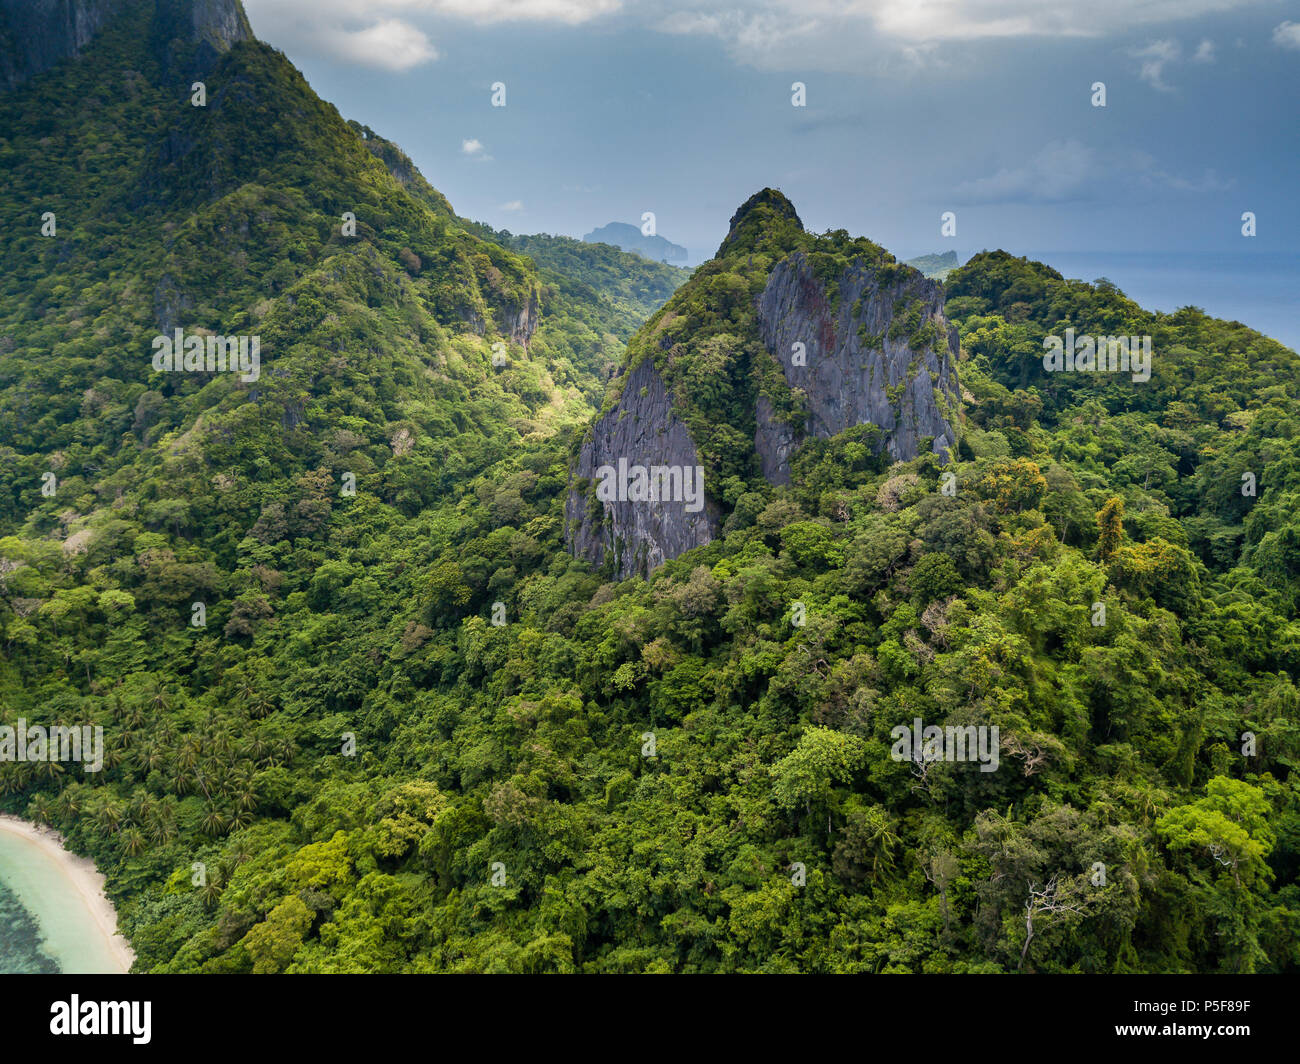 Aerial drone view of a remote tropical island with towering jagged limestone cliffs and jungle with a stormy sky Stock Photo